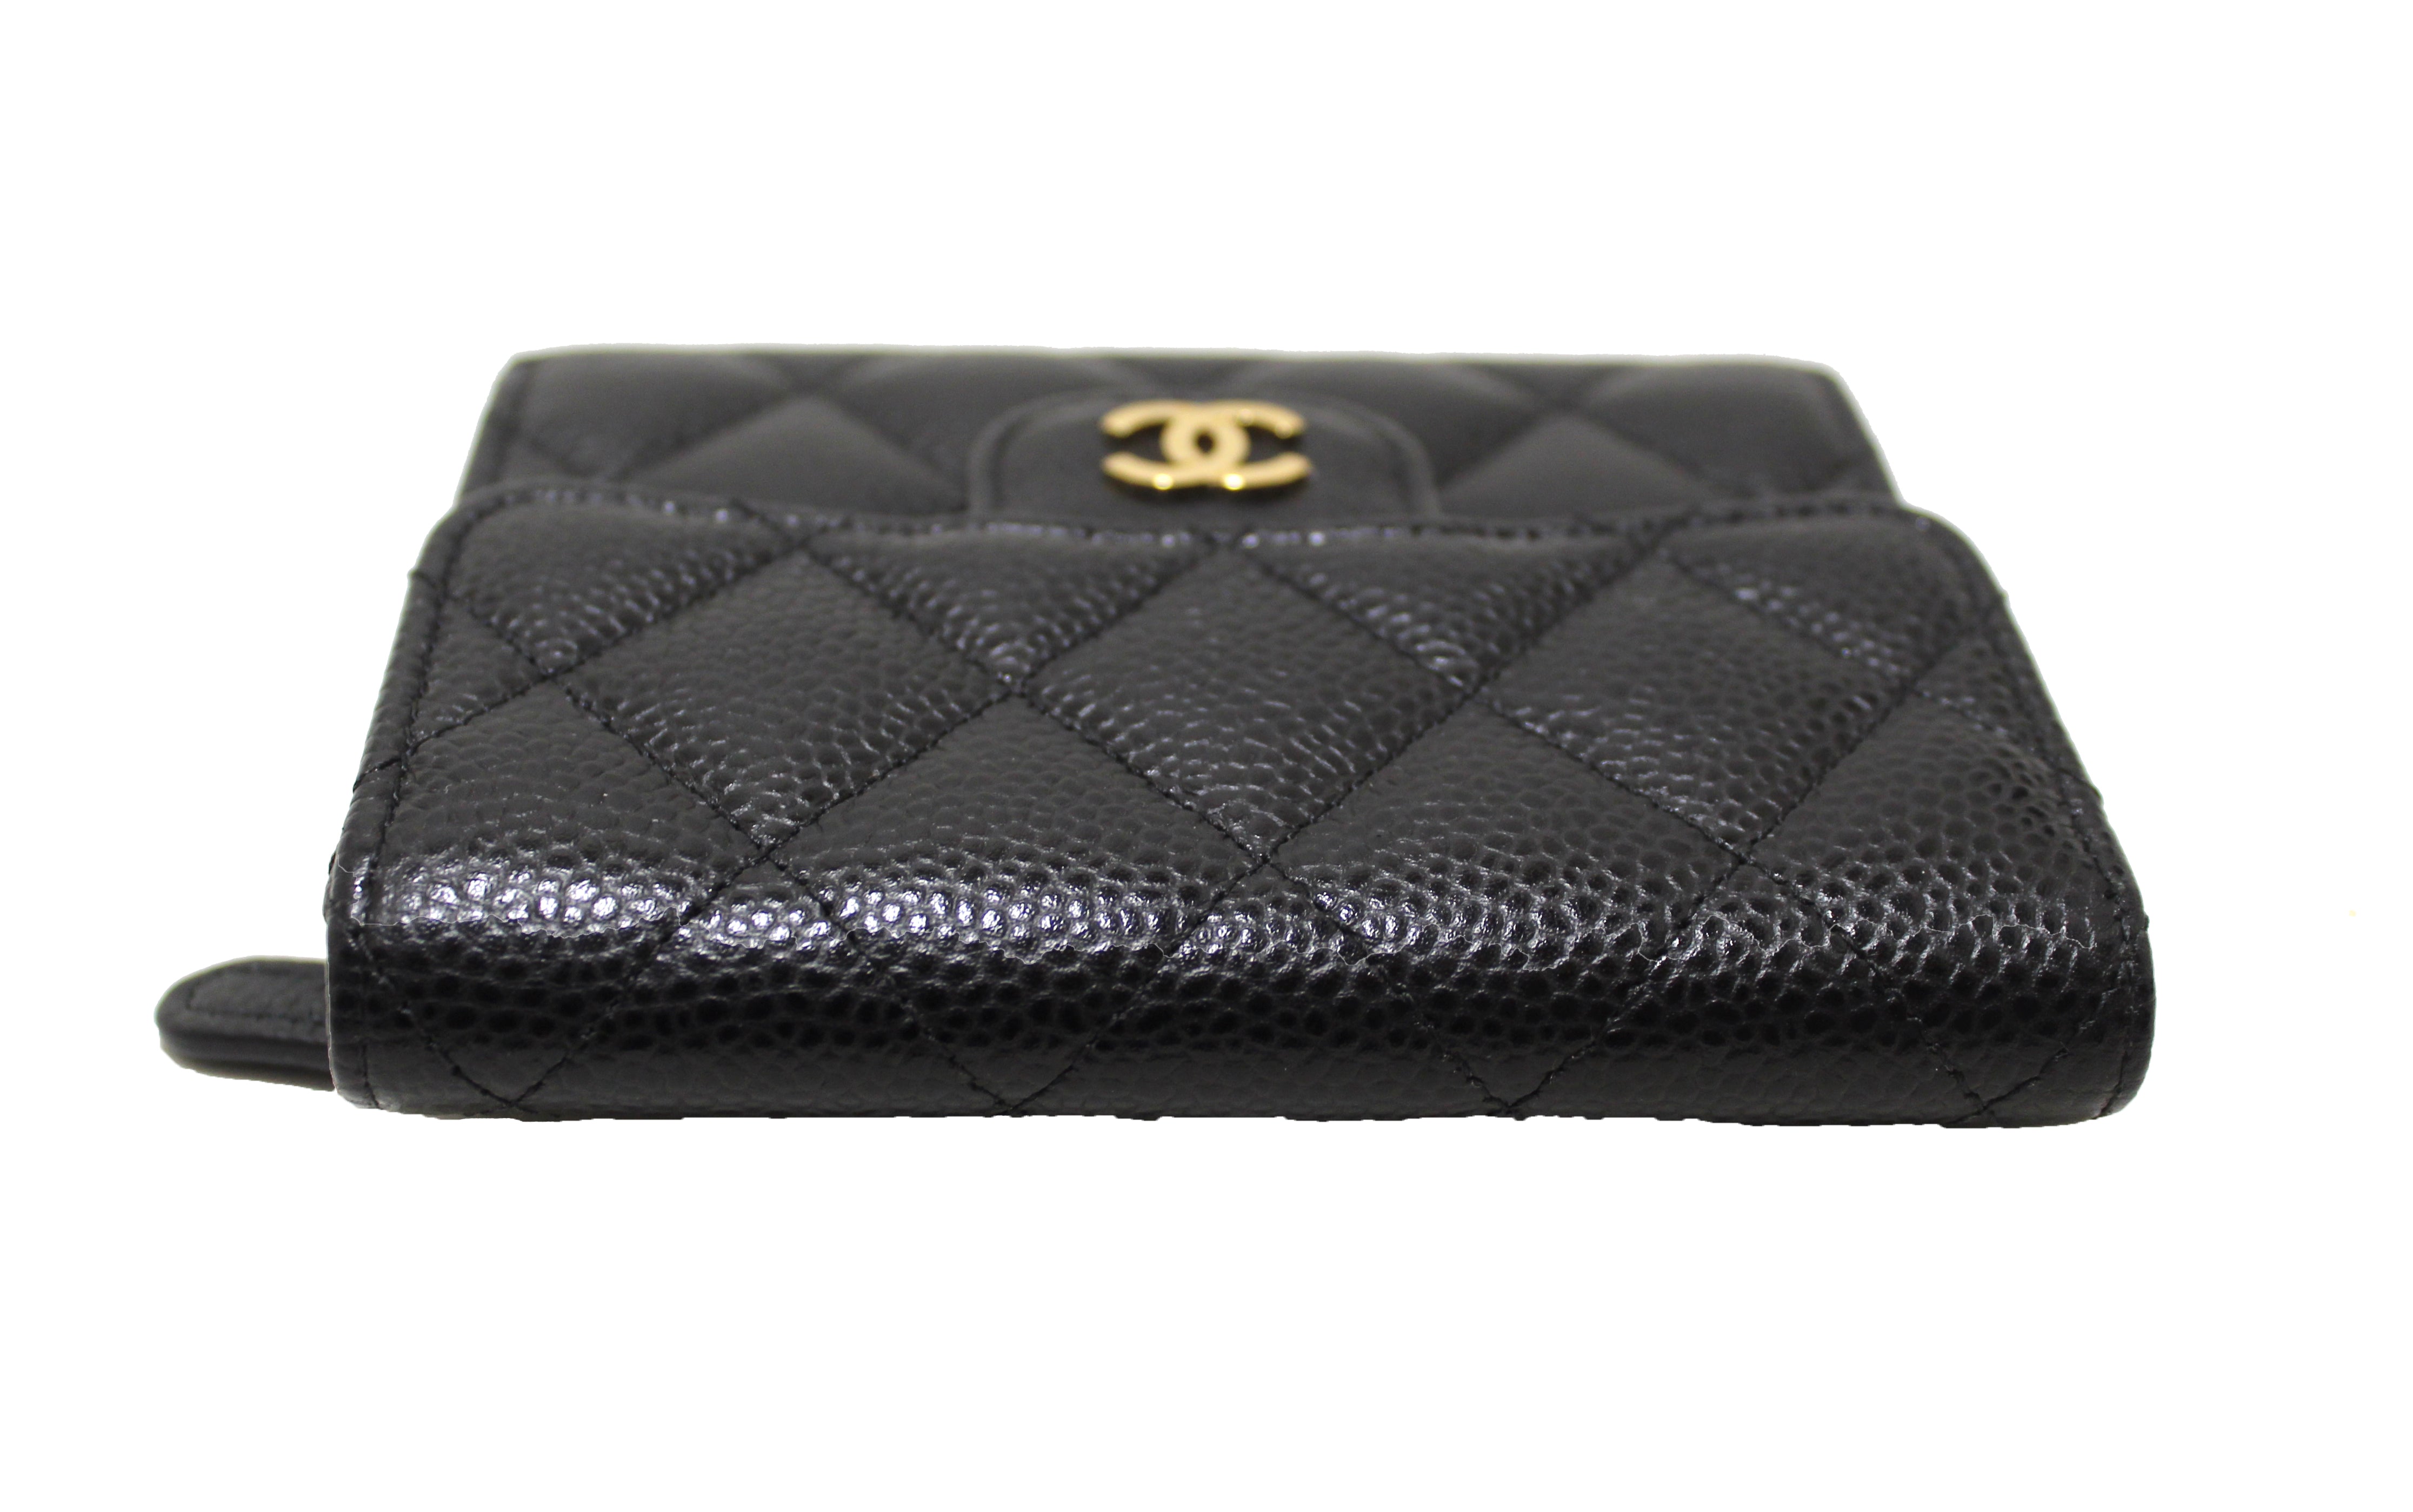 Chanel Bifold Wallet - 19 For Sale on 1stDibs